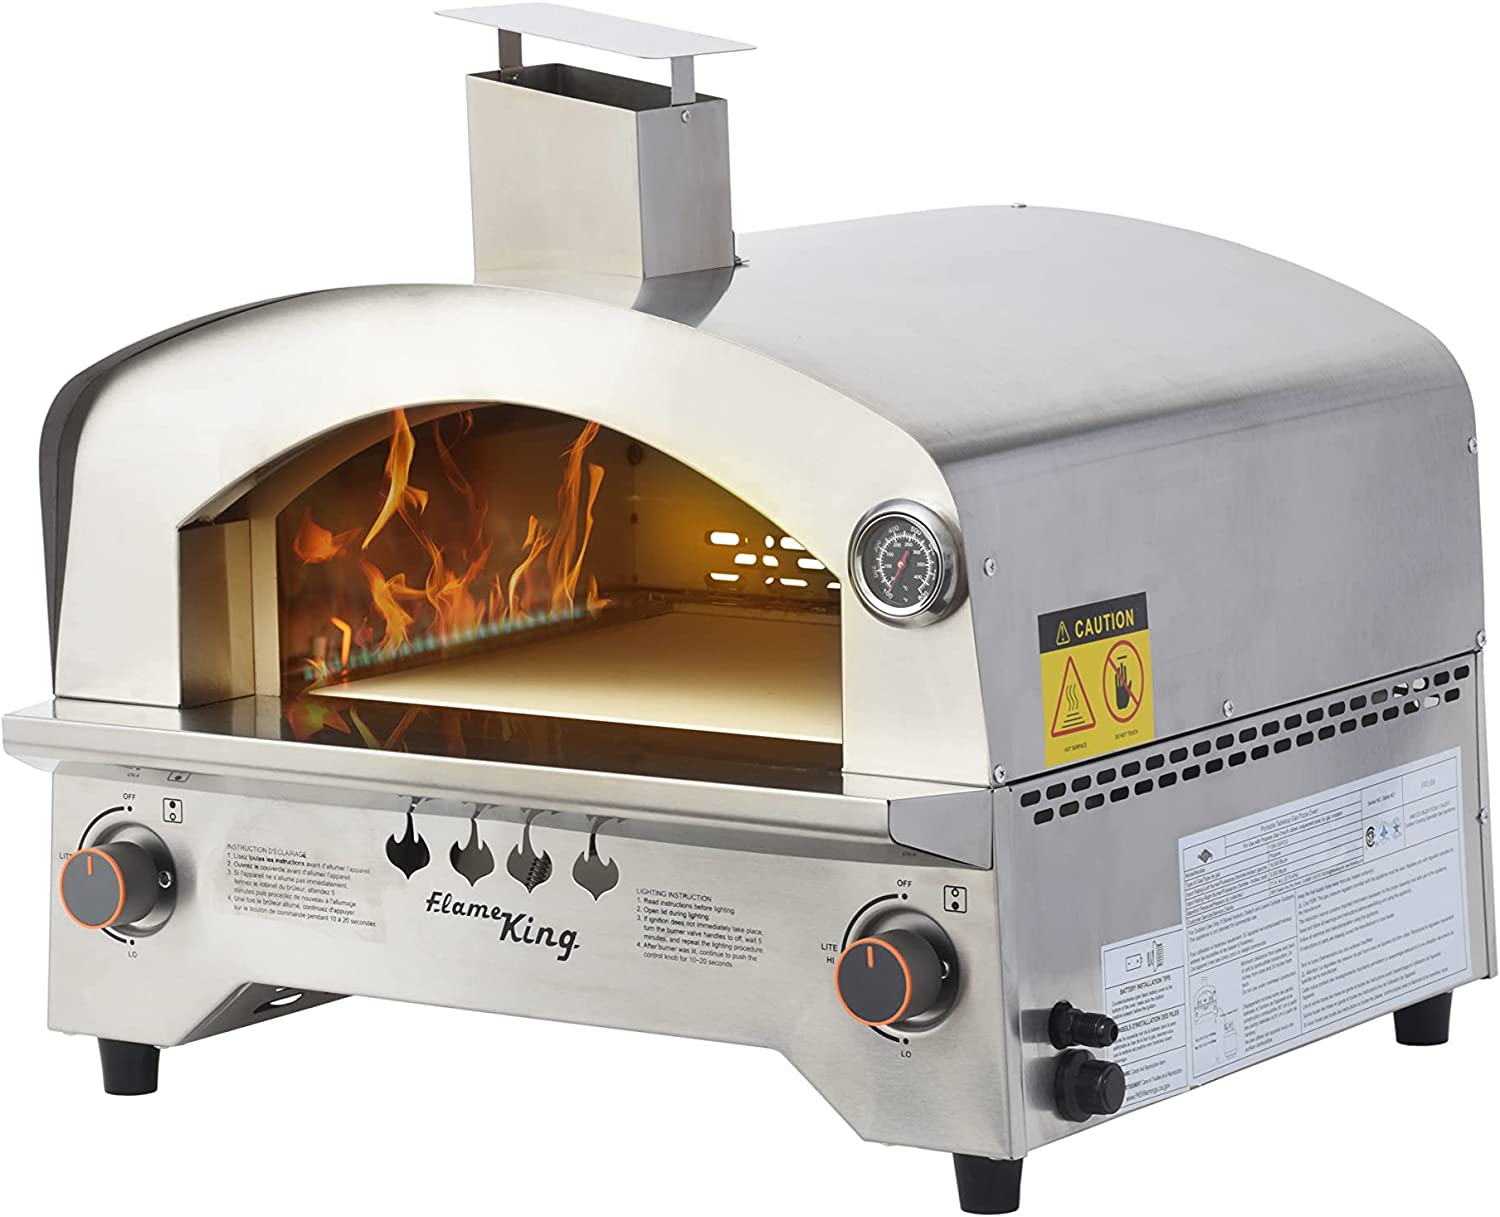 Flame King Propane Gas Pizza & Food Outdoor Oven for Camping, Backyard, Tailgating